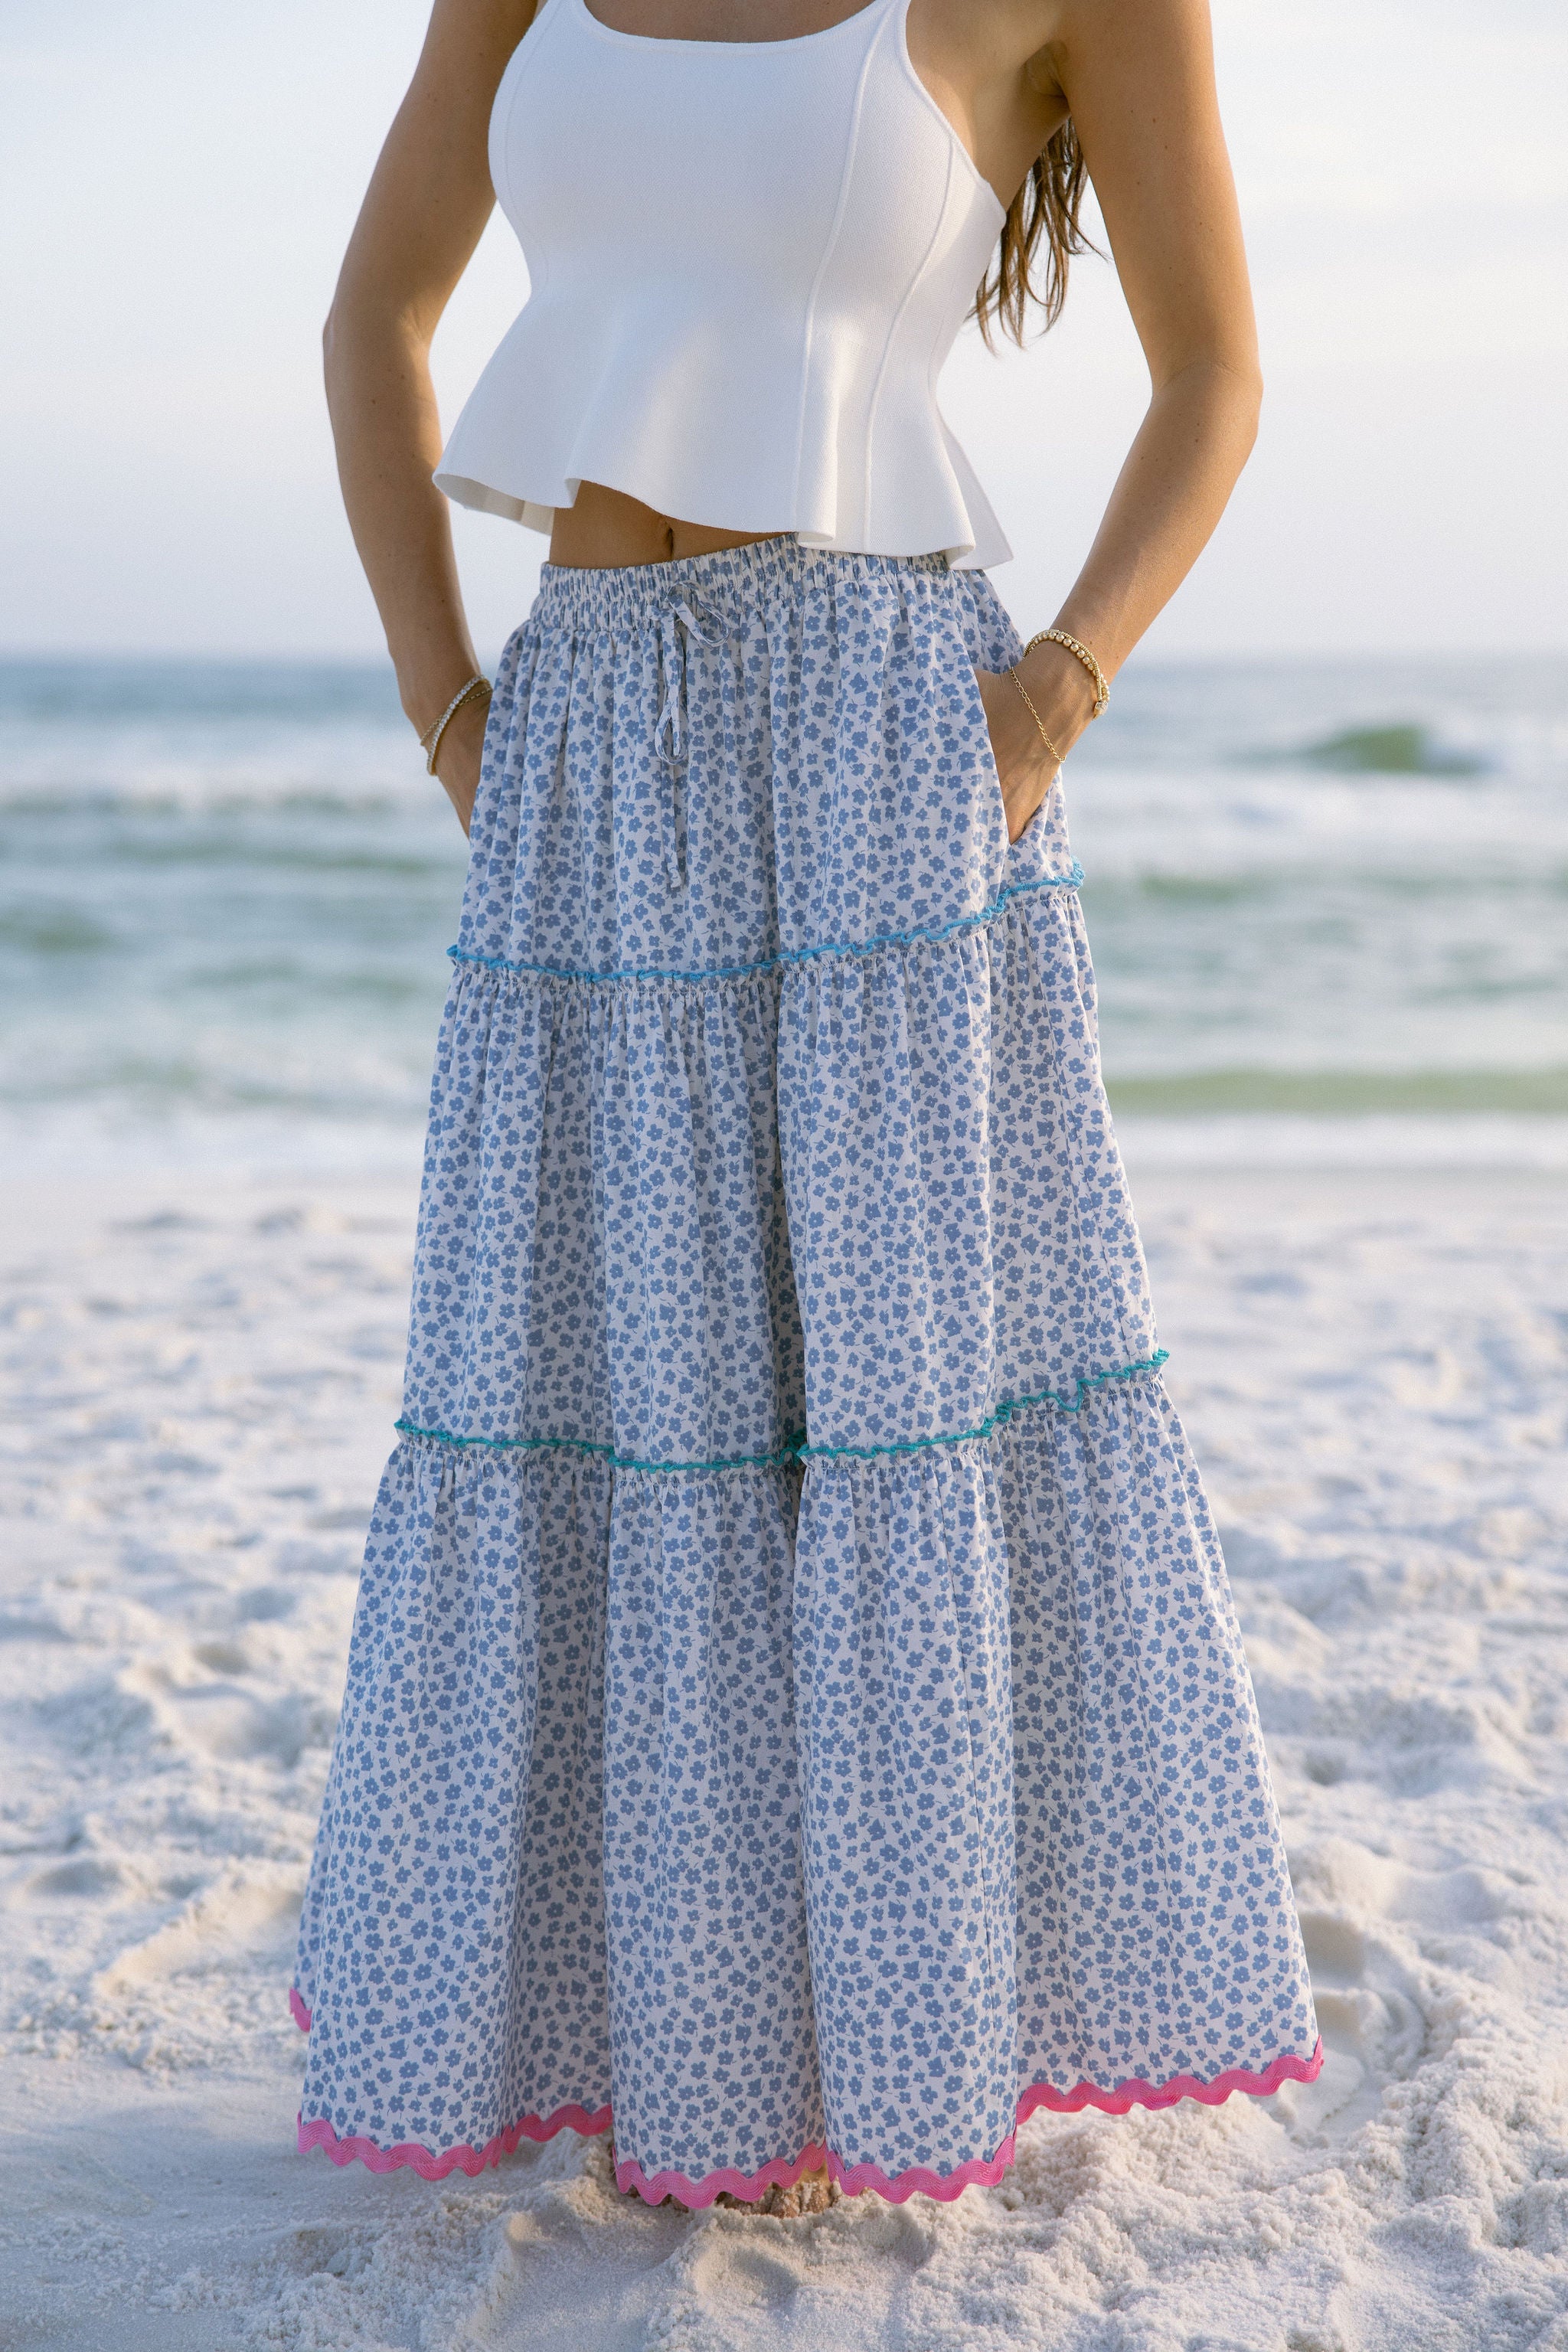 Lower body front view of female model wearing the Marisol Tiered Floral Maxi Skirt in Blue, that has blue and white floral fabric, colorful tiered ruffle trim, and an elastic waist. Worn with white tank top.